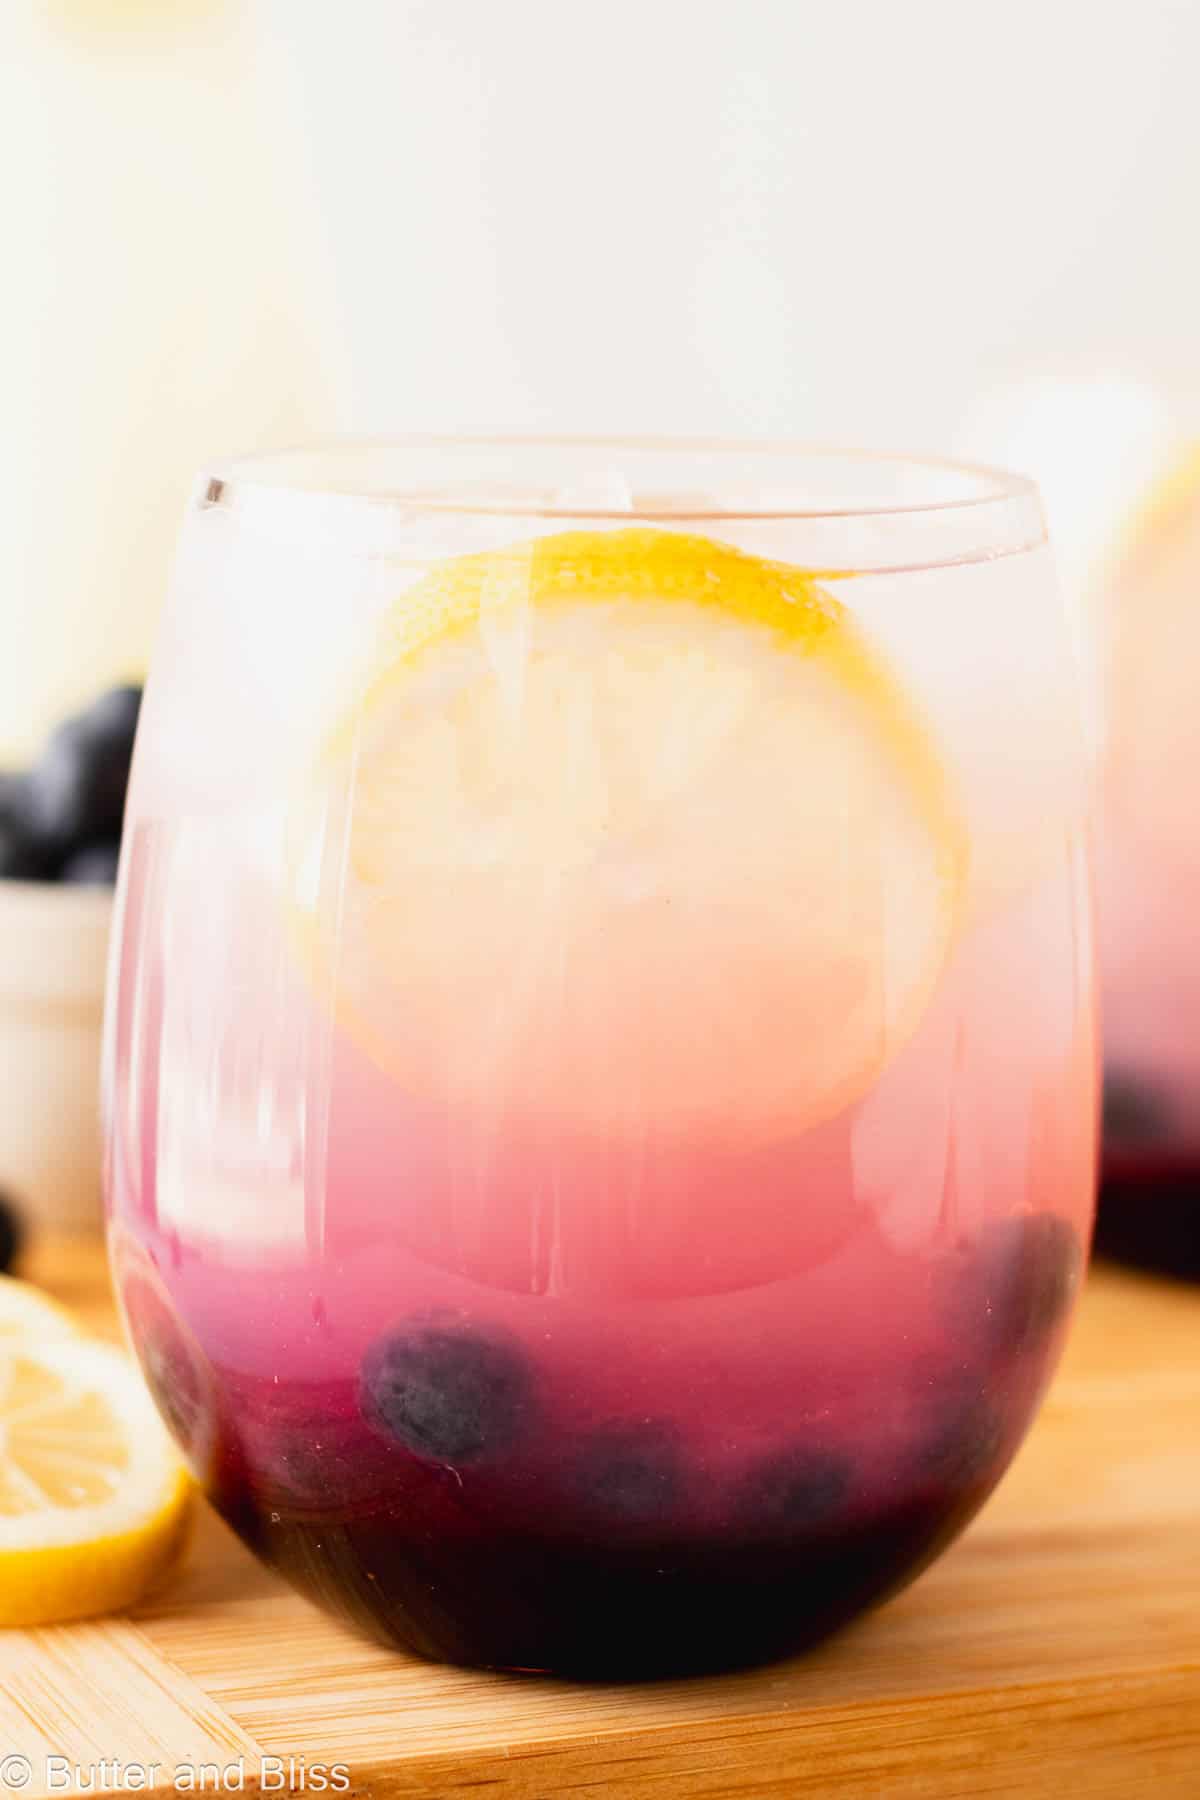 Beautiful close up of blueberry lemonade a glass with a slice of lemon.